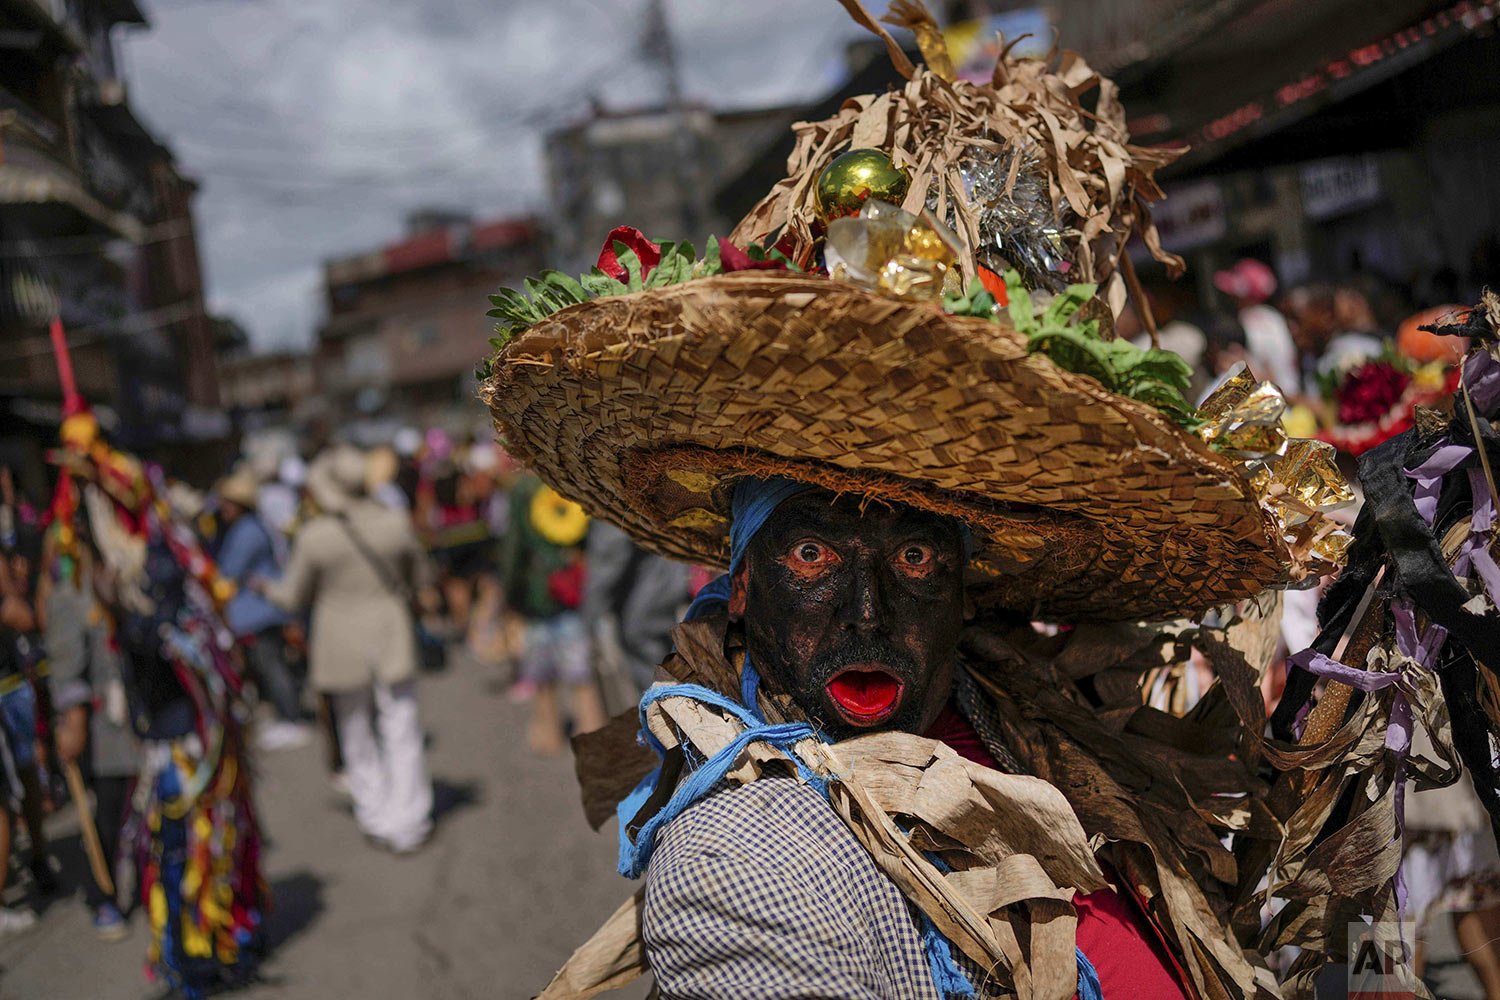  A man dressed as a bolero strikes a pose during festivities during Holy Innocents Day in Caucagua, Venezuela, Dec. 28, 2021. Residents celebrate a variation of the feast day wearing old clothes, painting their faces black and tongues red. The more t